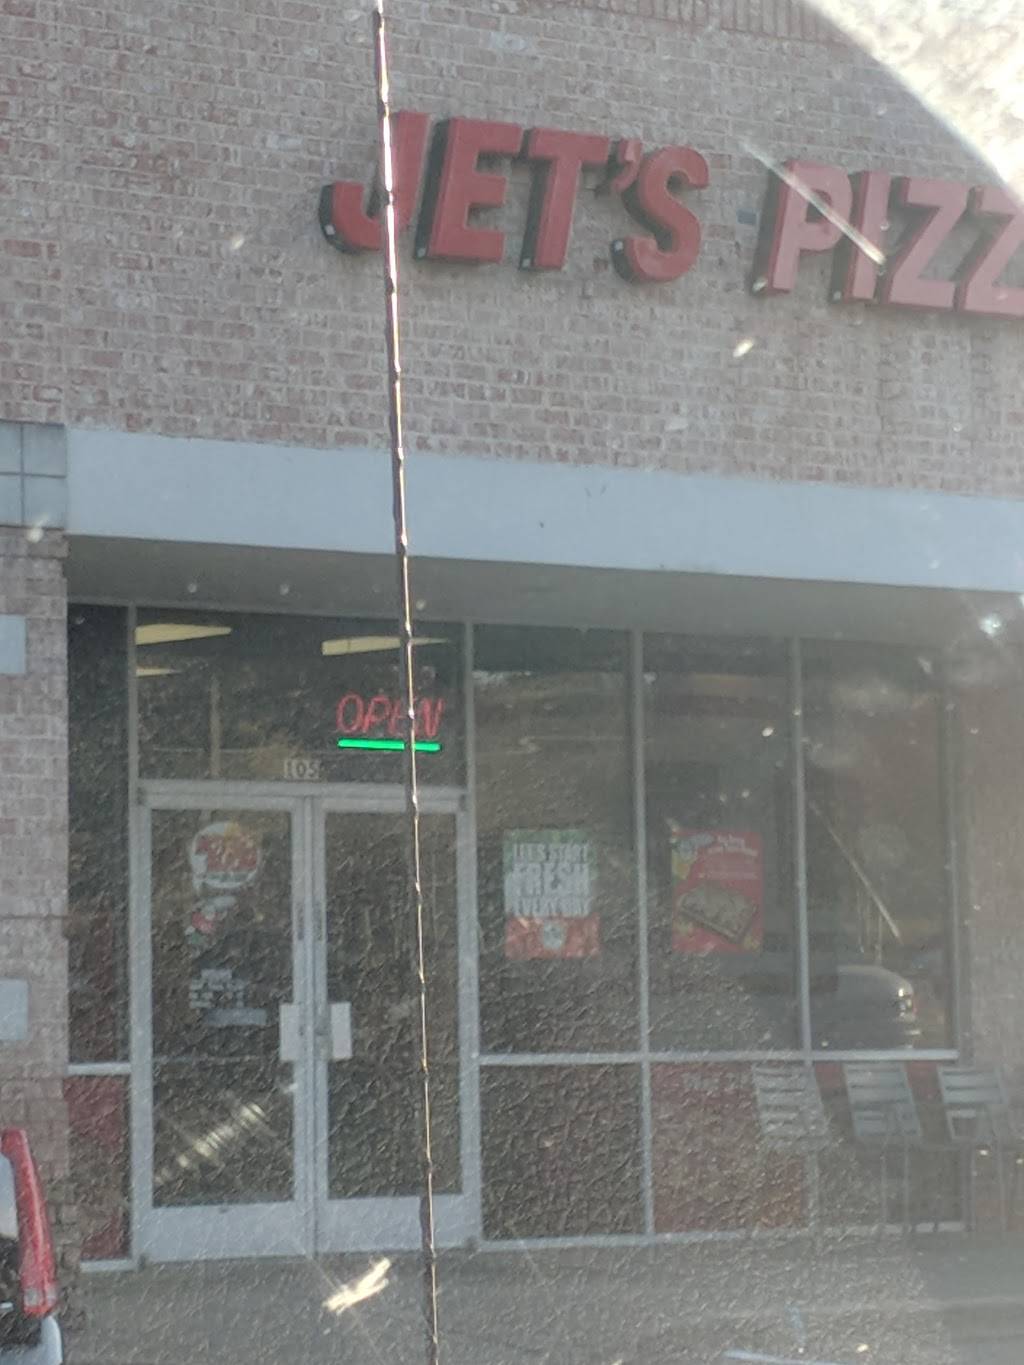 Jets Pizza | 2001 Cross Timbers Rd #105, Flower Mound, TX 75028 | Phone: (972) 221-5387